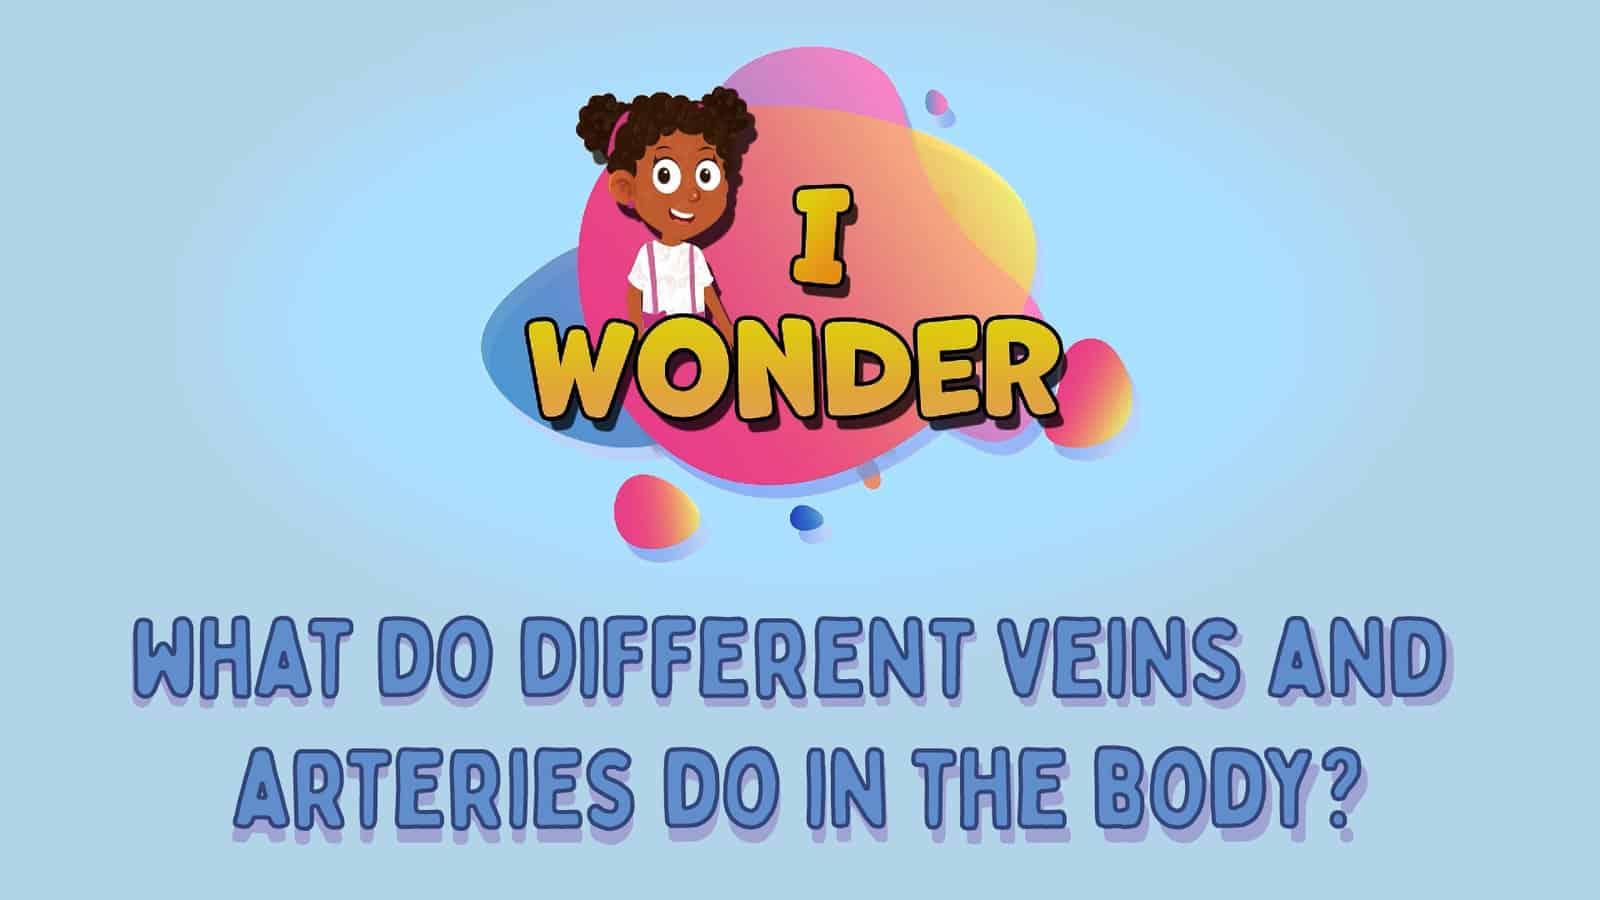 What Do Different Veins And Arteries Do In The Body?